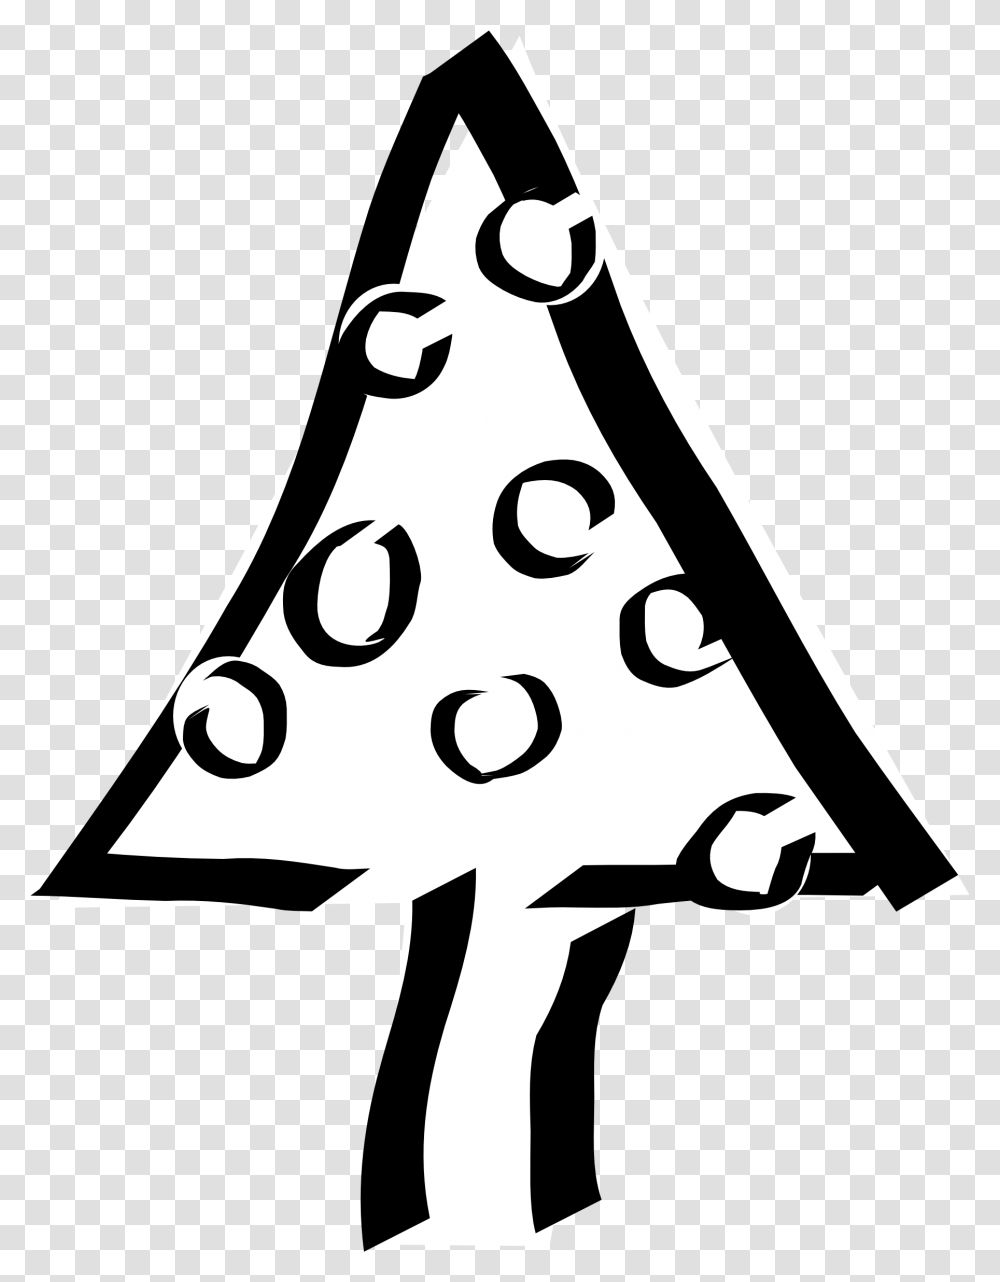 Christmas Tree Black And White Clipart Christmas Tree Clip Art, Plant, Ornament, Triangle, Stencil Transparent Png